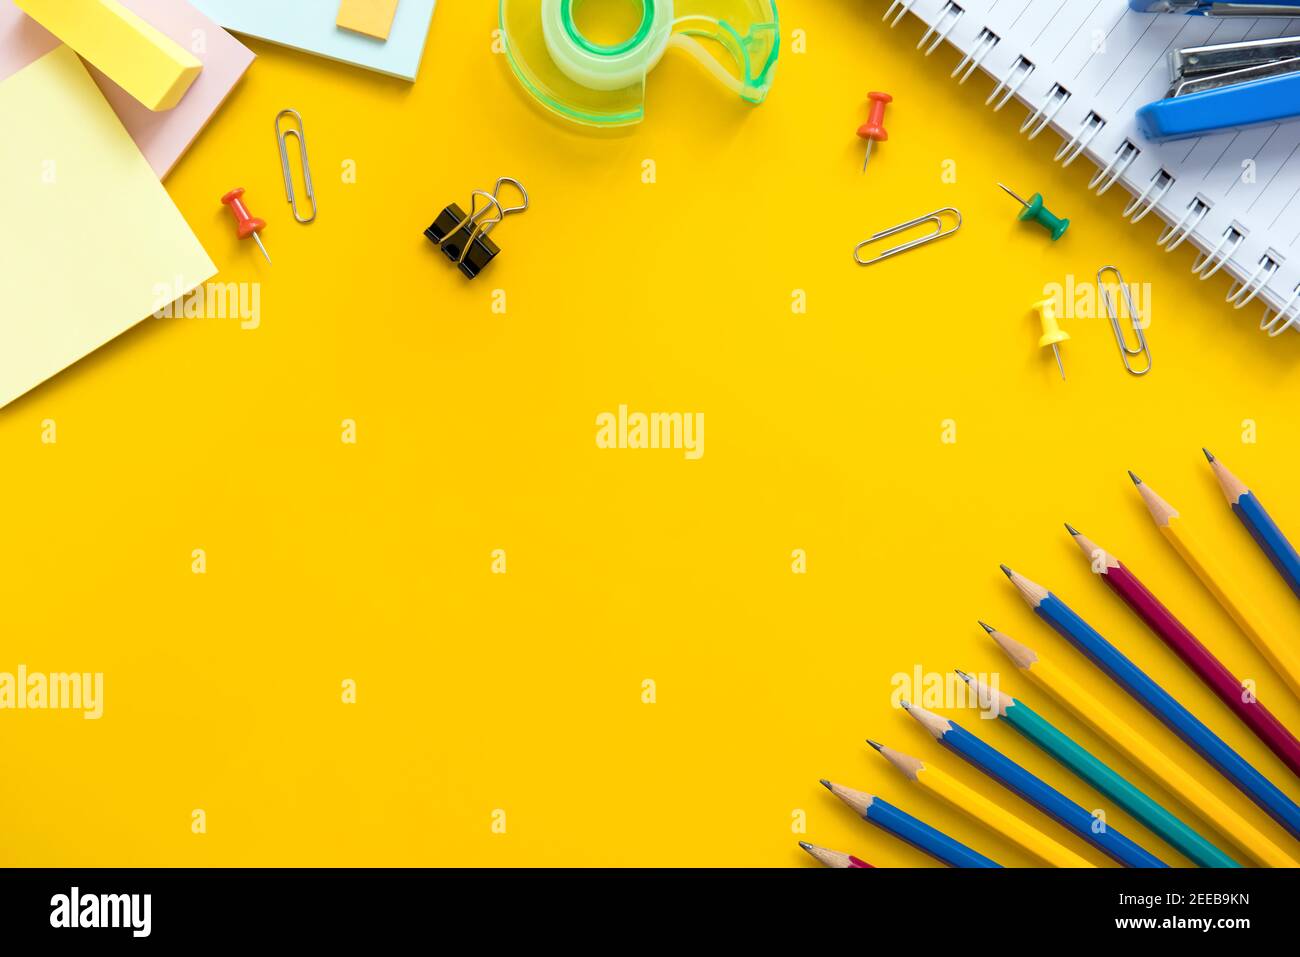 Colorful office and educational supplies on yellow background with copy space Stock Photo